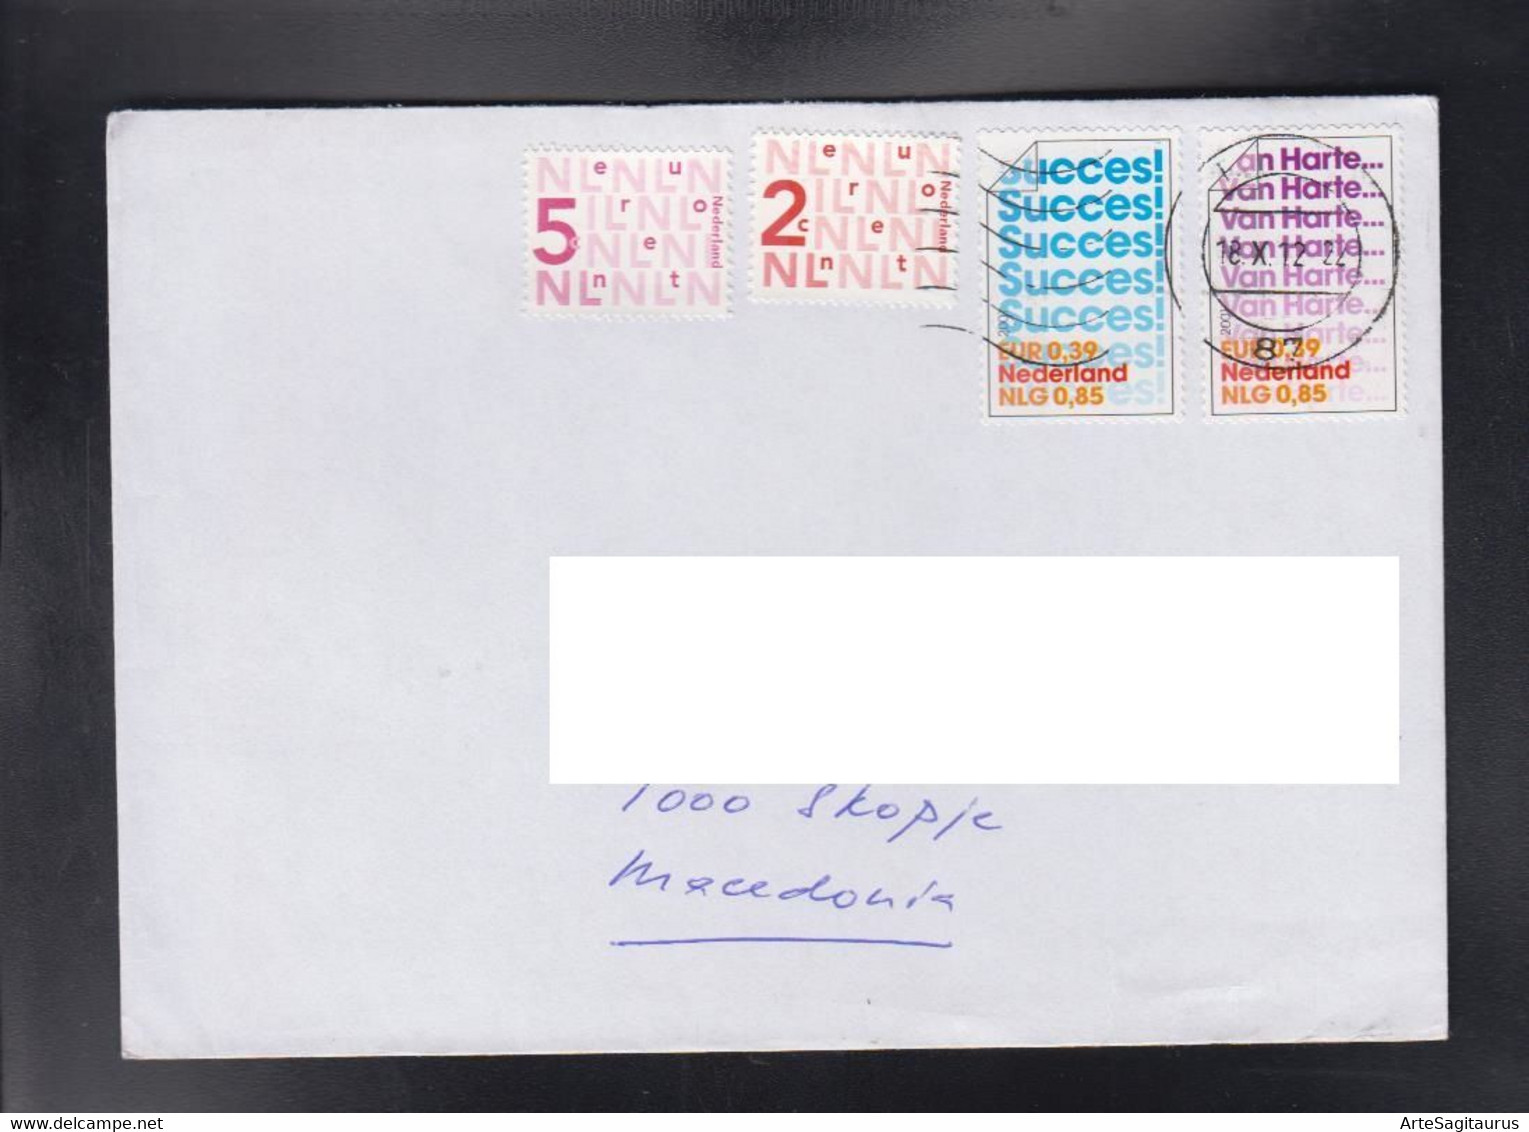 NETHERLANDS, COVER, REPUBLIC OF MACEDONIA + - Storia Postale